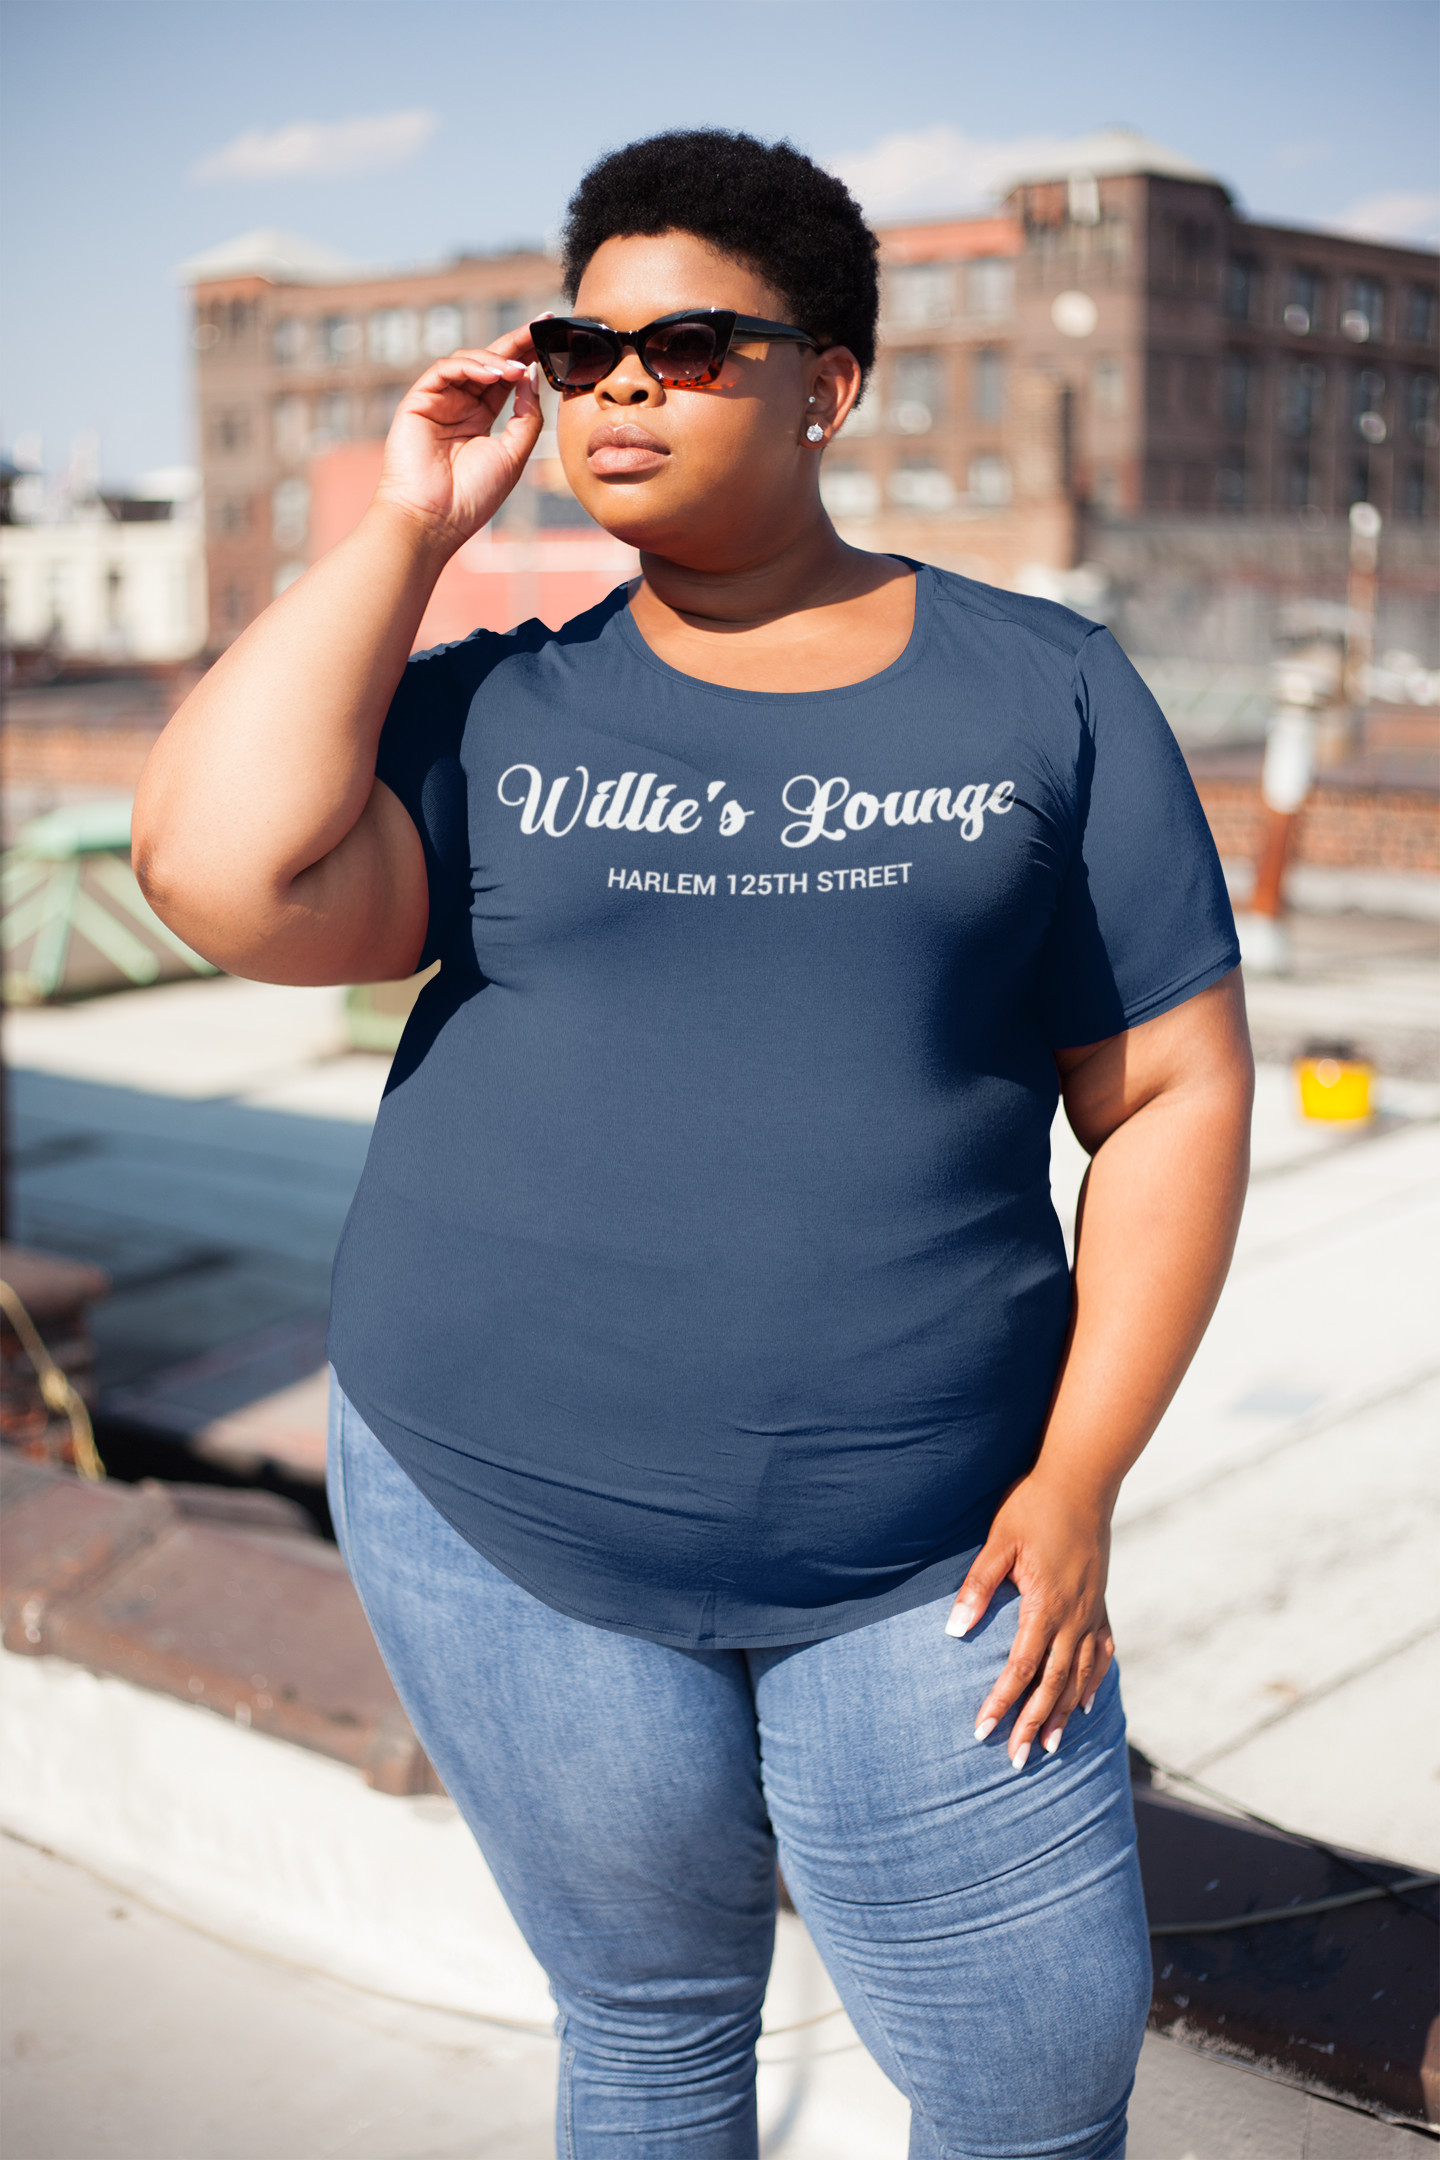 Willie’s Lounge T-Shirt